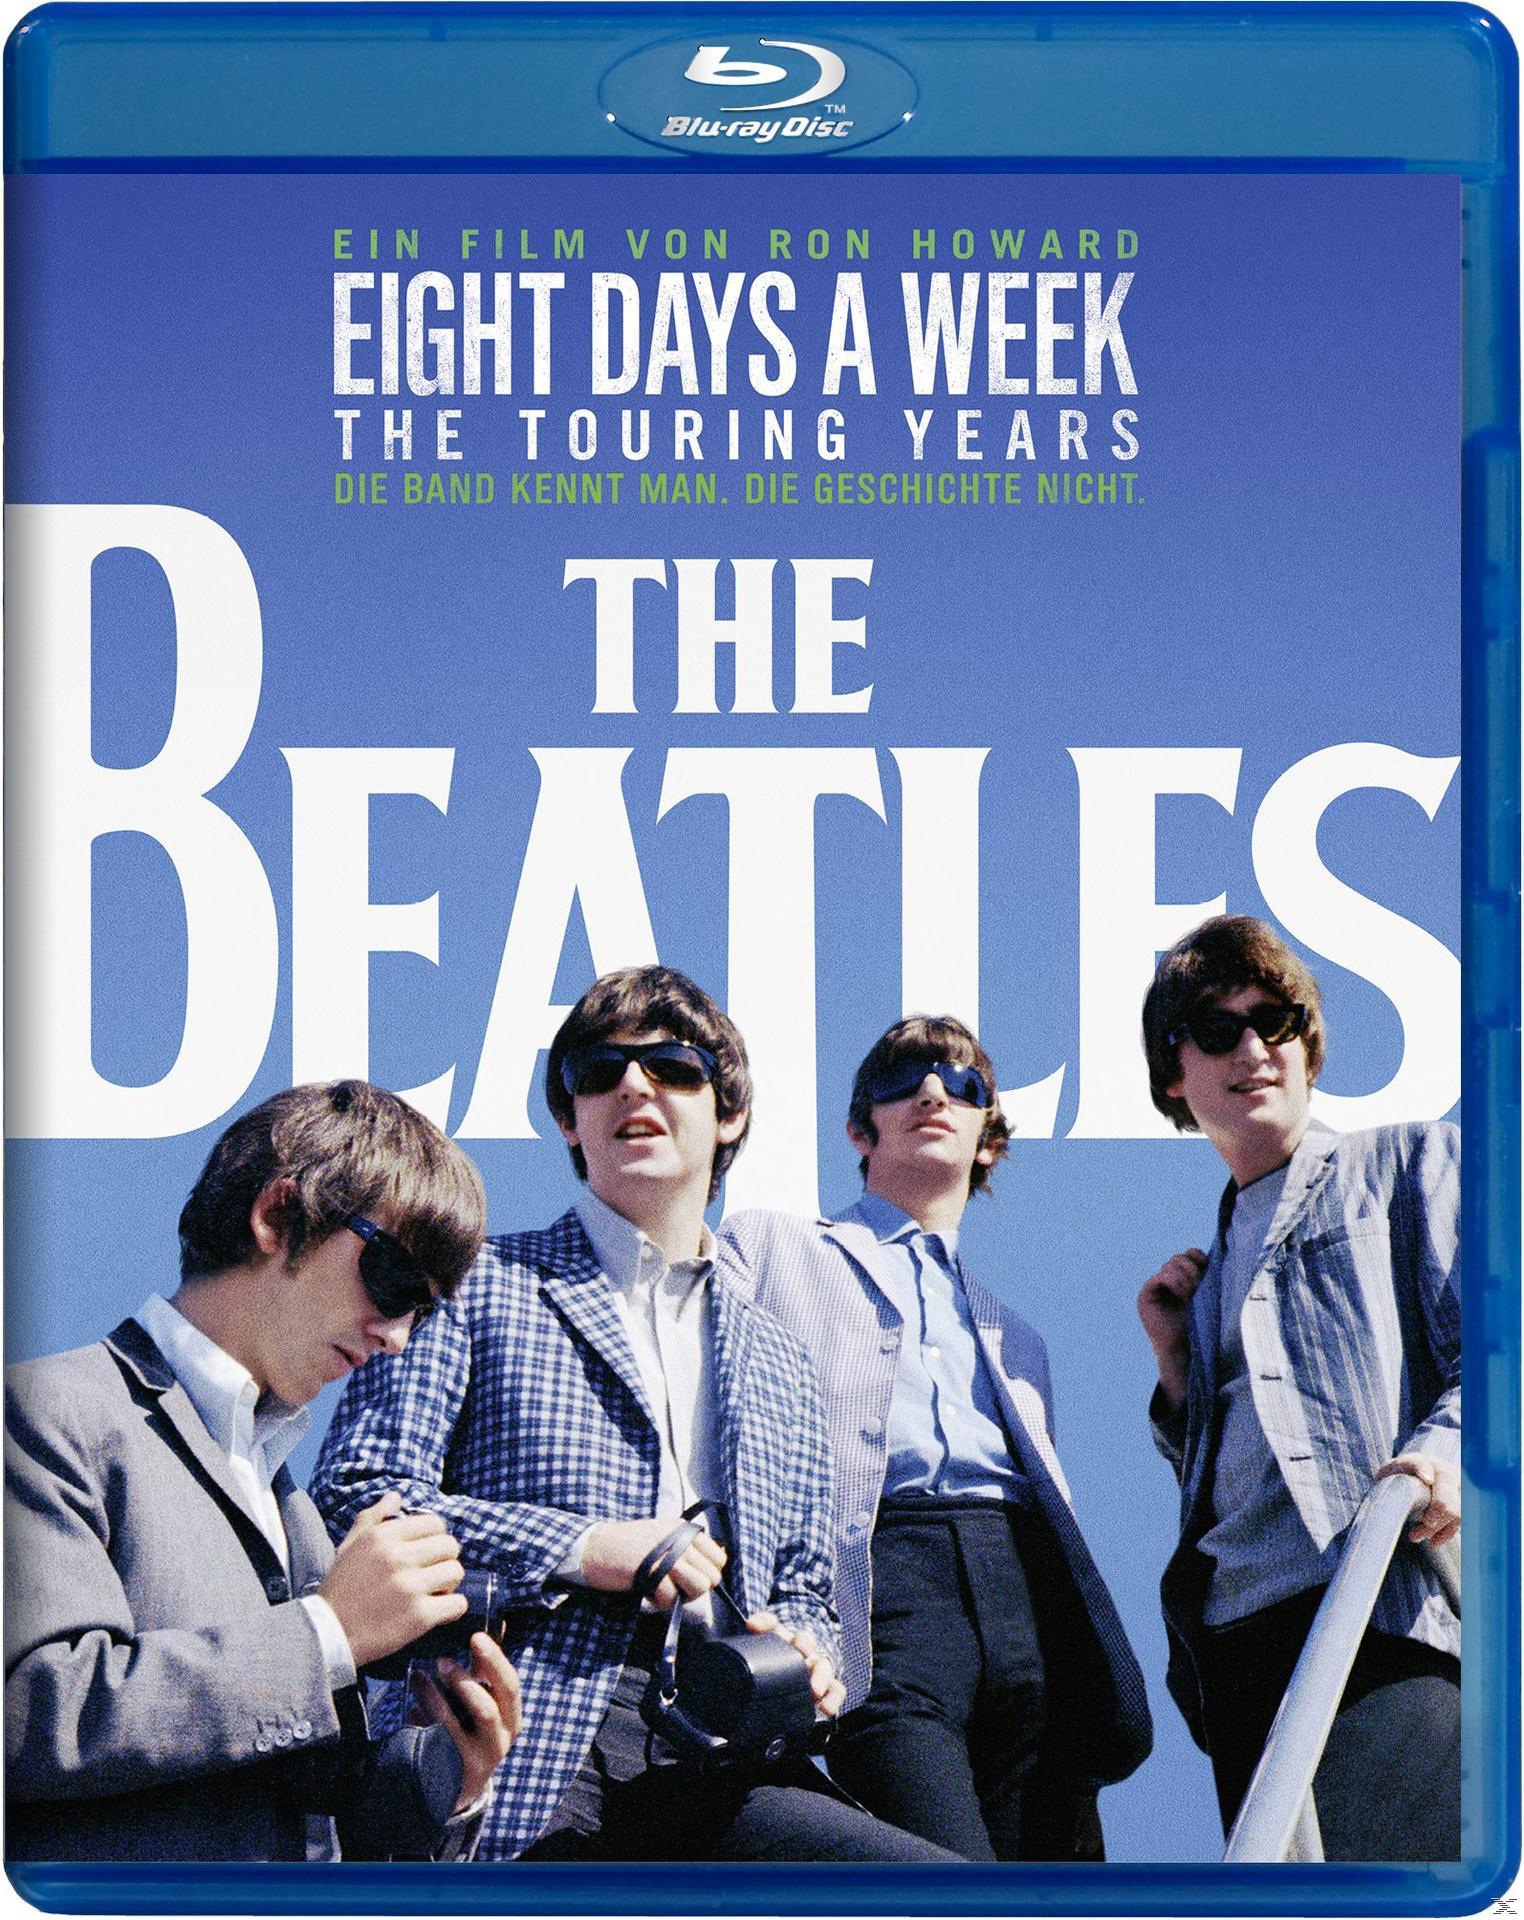 The Beatles - Week Blu-ray a Eight Days